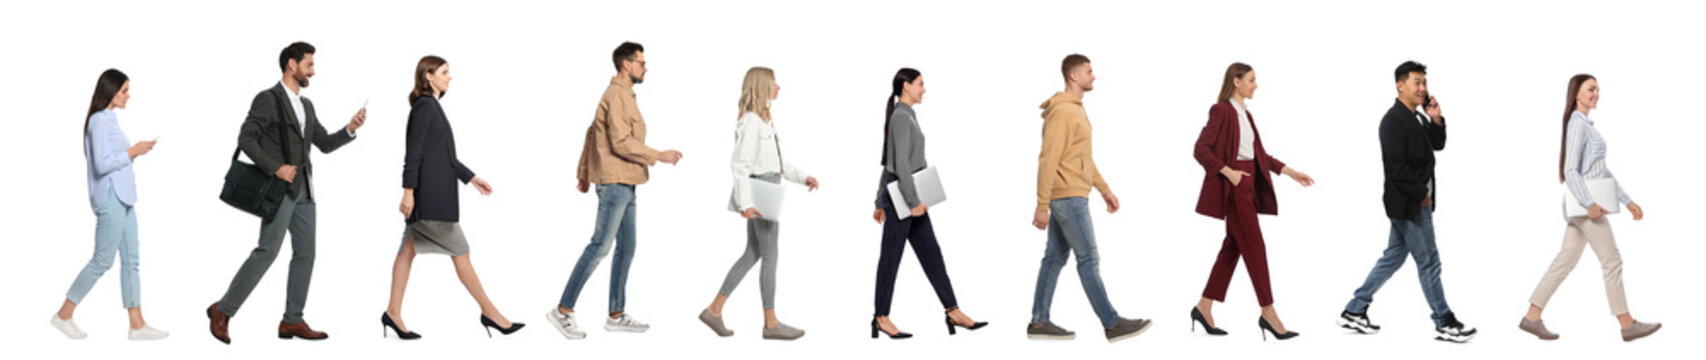 Collage with photos of people wearing stylish outfit walking on white background. Banner design